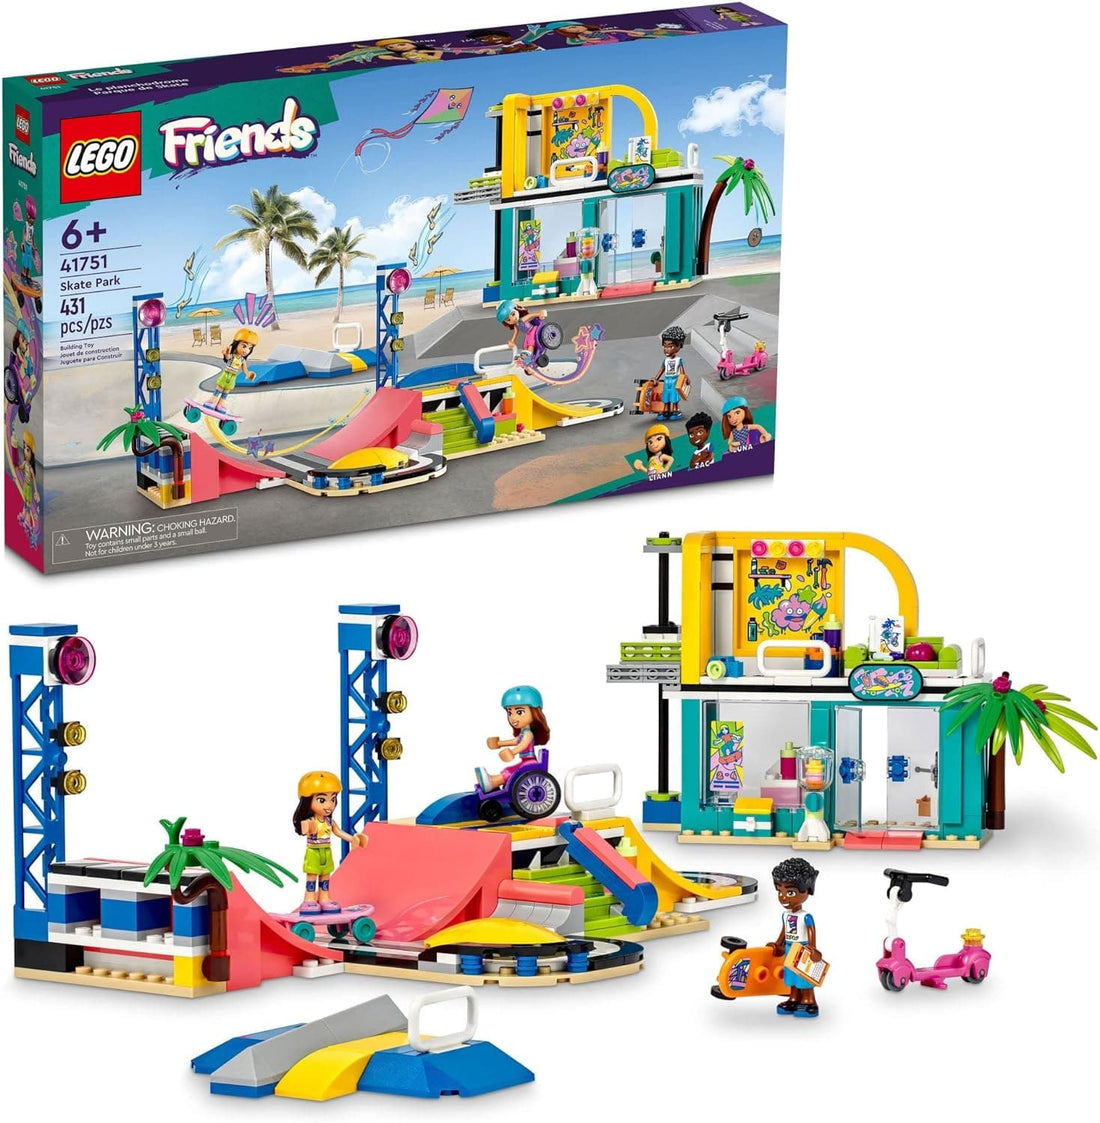 LEGO Friends Skate Park Set with Toy Scooter and Wheelchair - best price from Maltashopper.com 41751